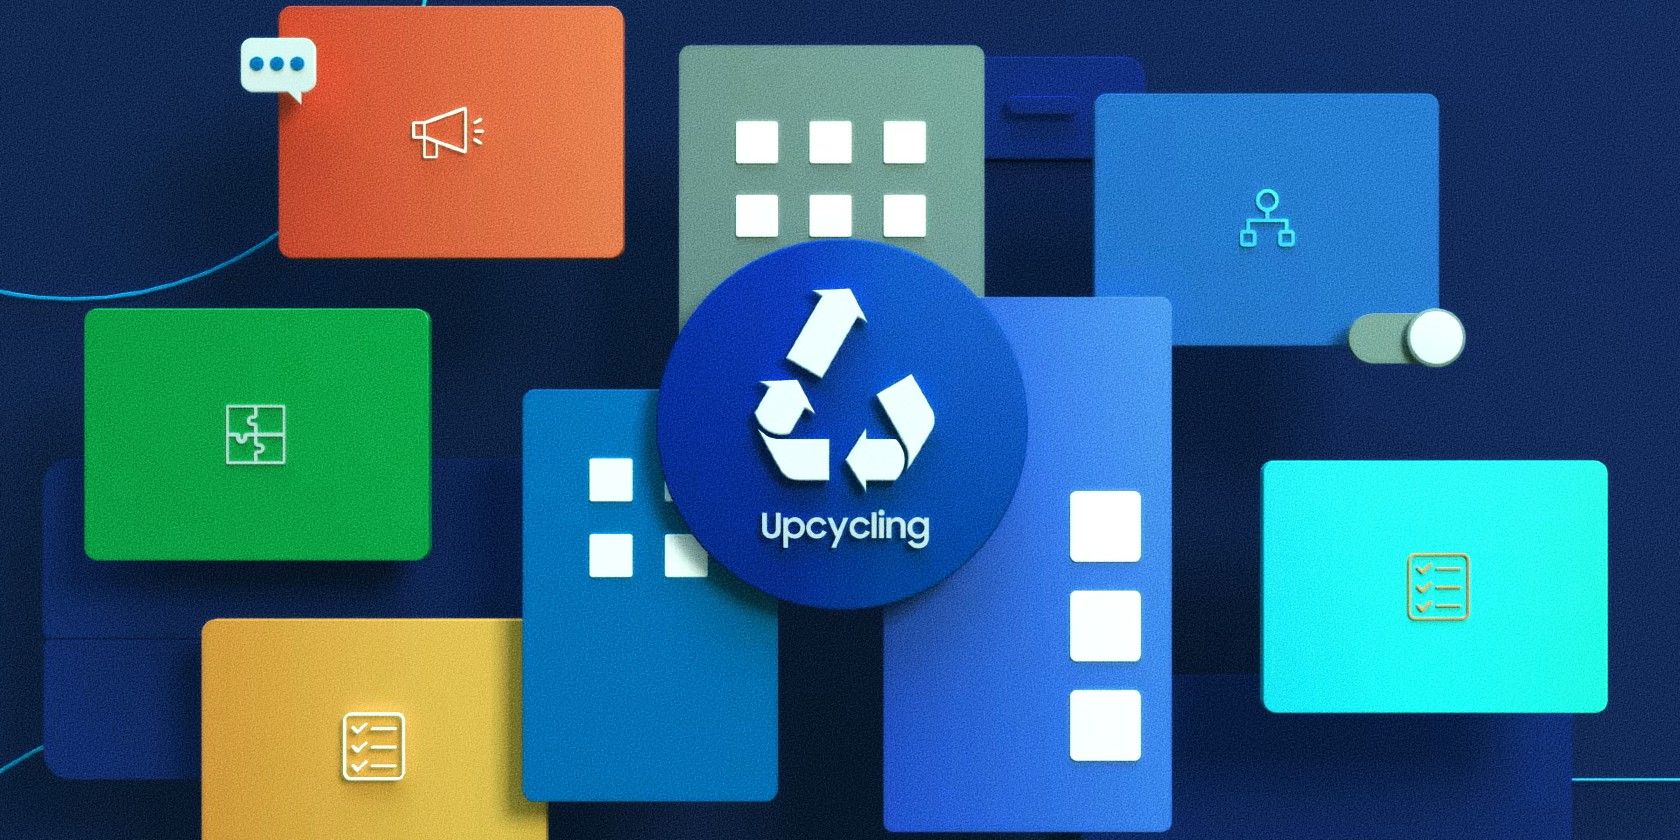 Samsung Breathes New Life Into Old Hardware With "Upcycling at Home" Scheme